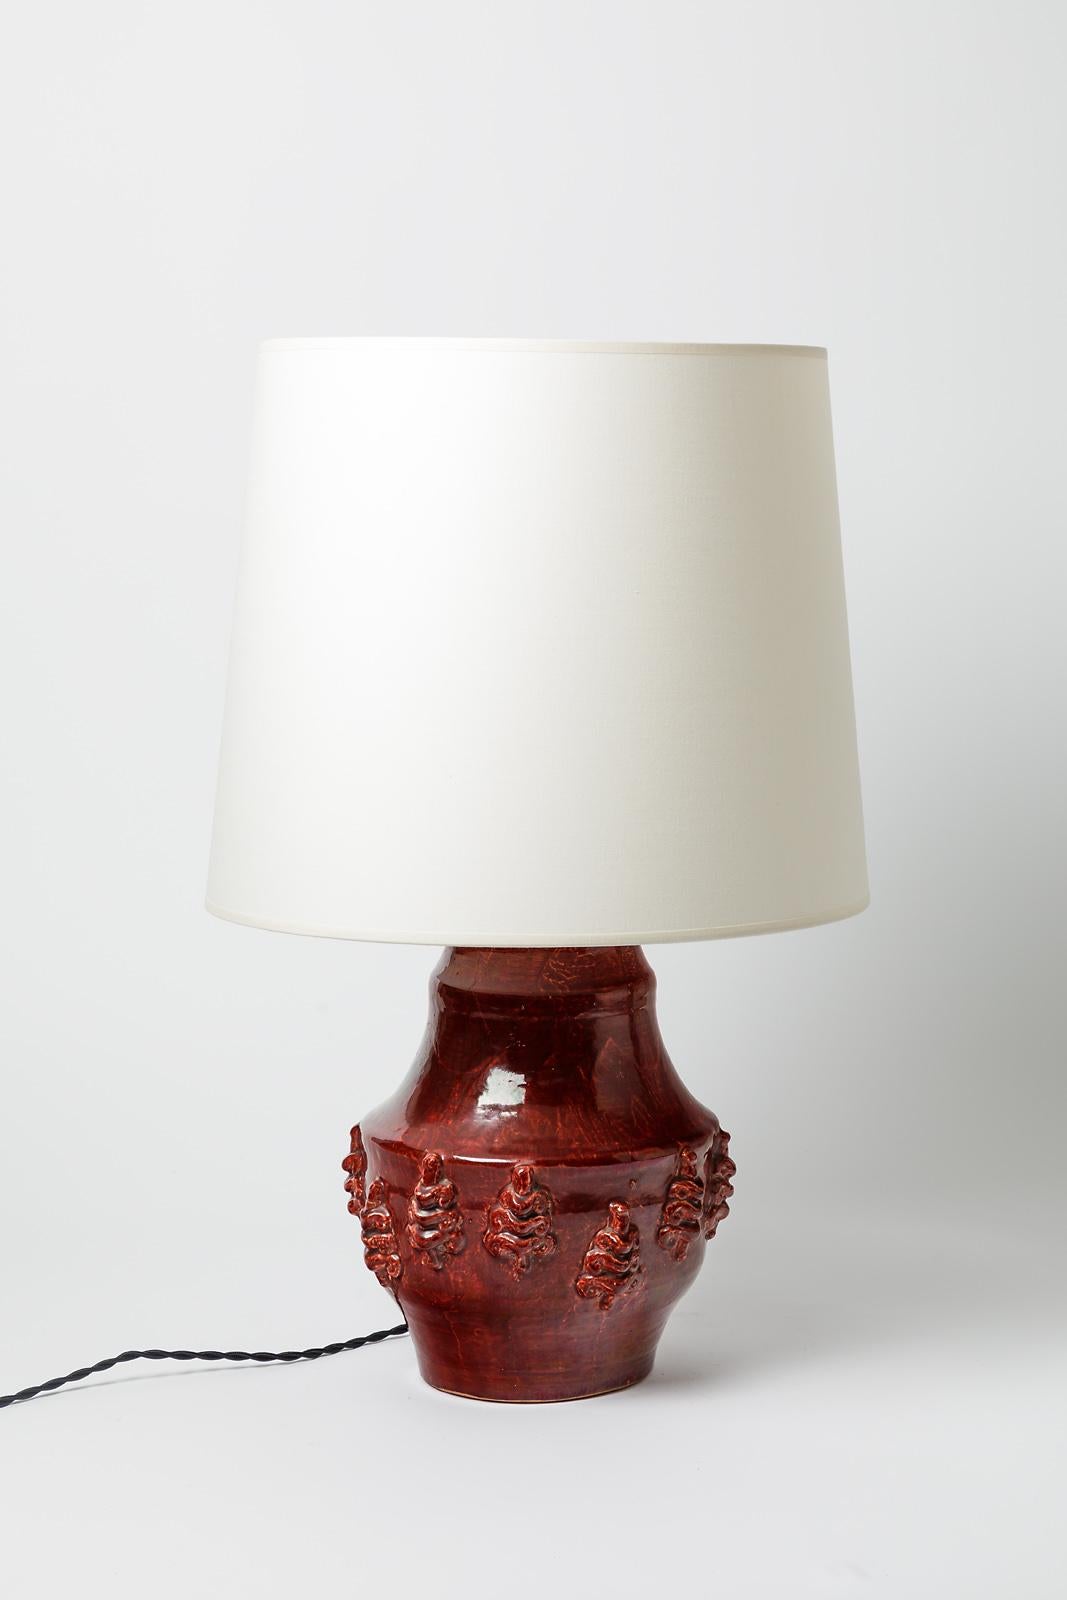 A ceramic table lamp with red glaze decoration by Jean Austry.
Sold with a new lamp shaded new european electrical system
Perfect original conditions.
Signed under the base.
Circa 1960- 1970.
Dimensions :
- Ceramic only : 21 x 21 cm / 8.2 x